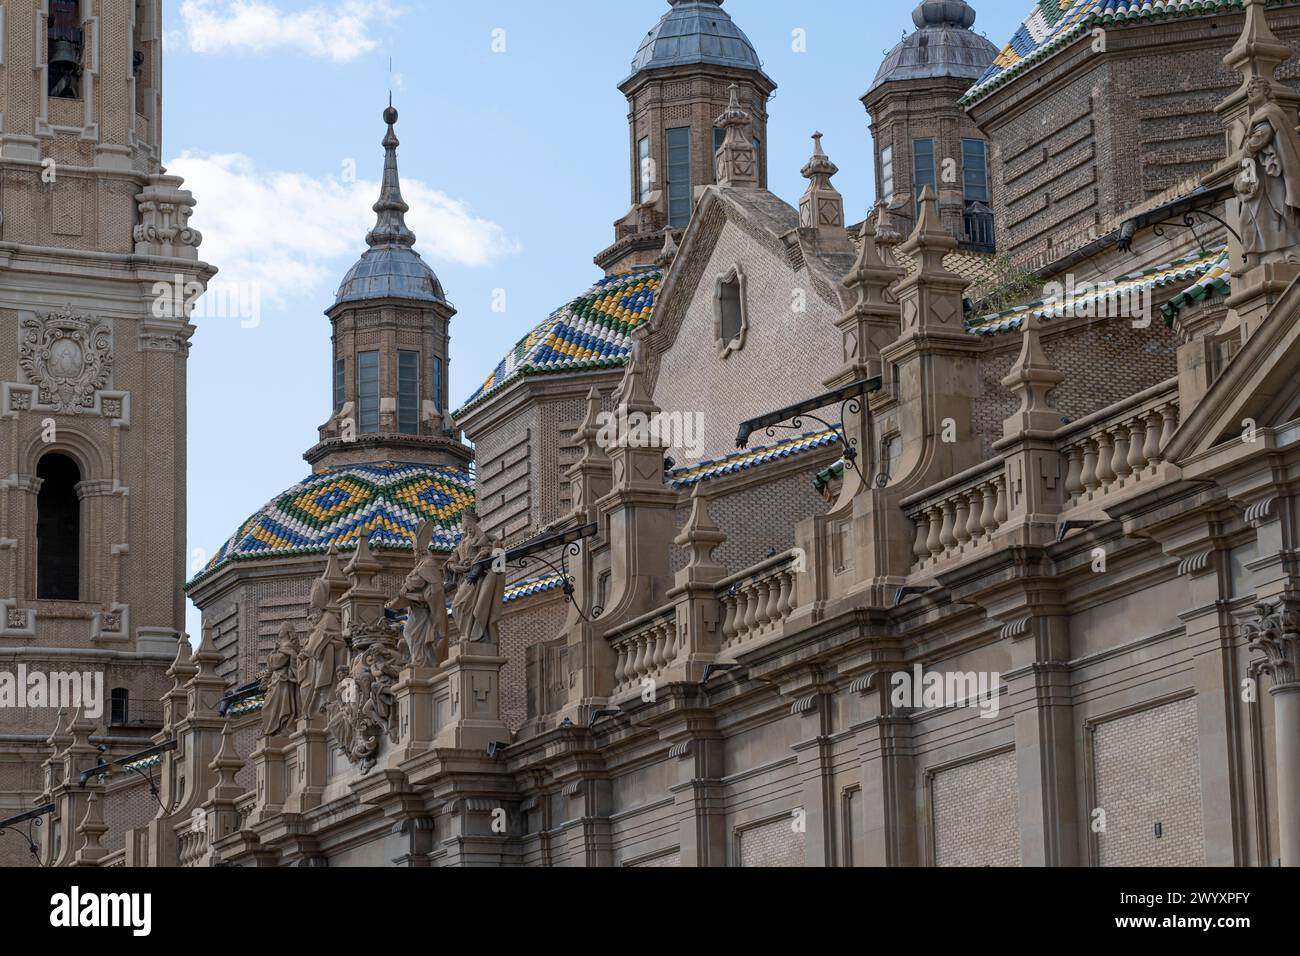 Grand front view of Basilica del Pilar's Baroque facade, adorned with sculptures, under a vibrant blue sky Stock Photo